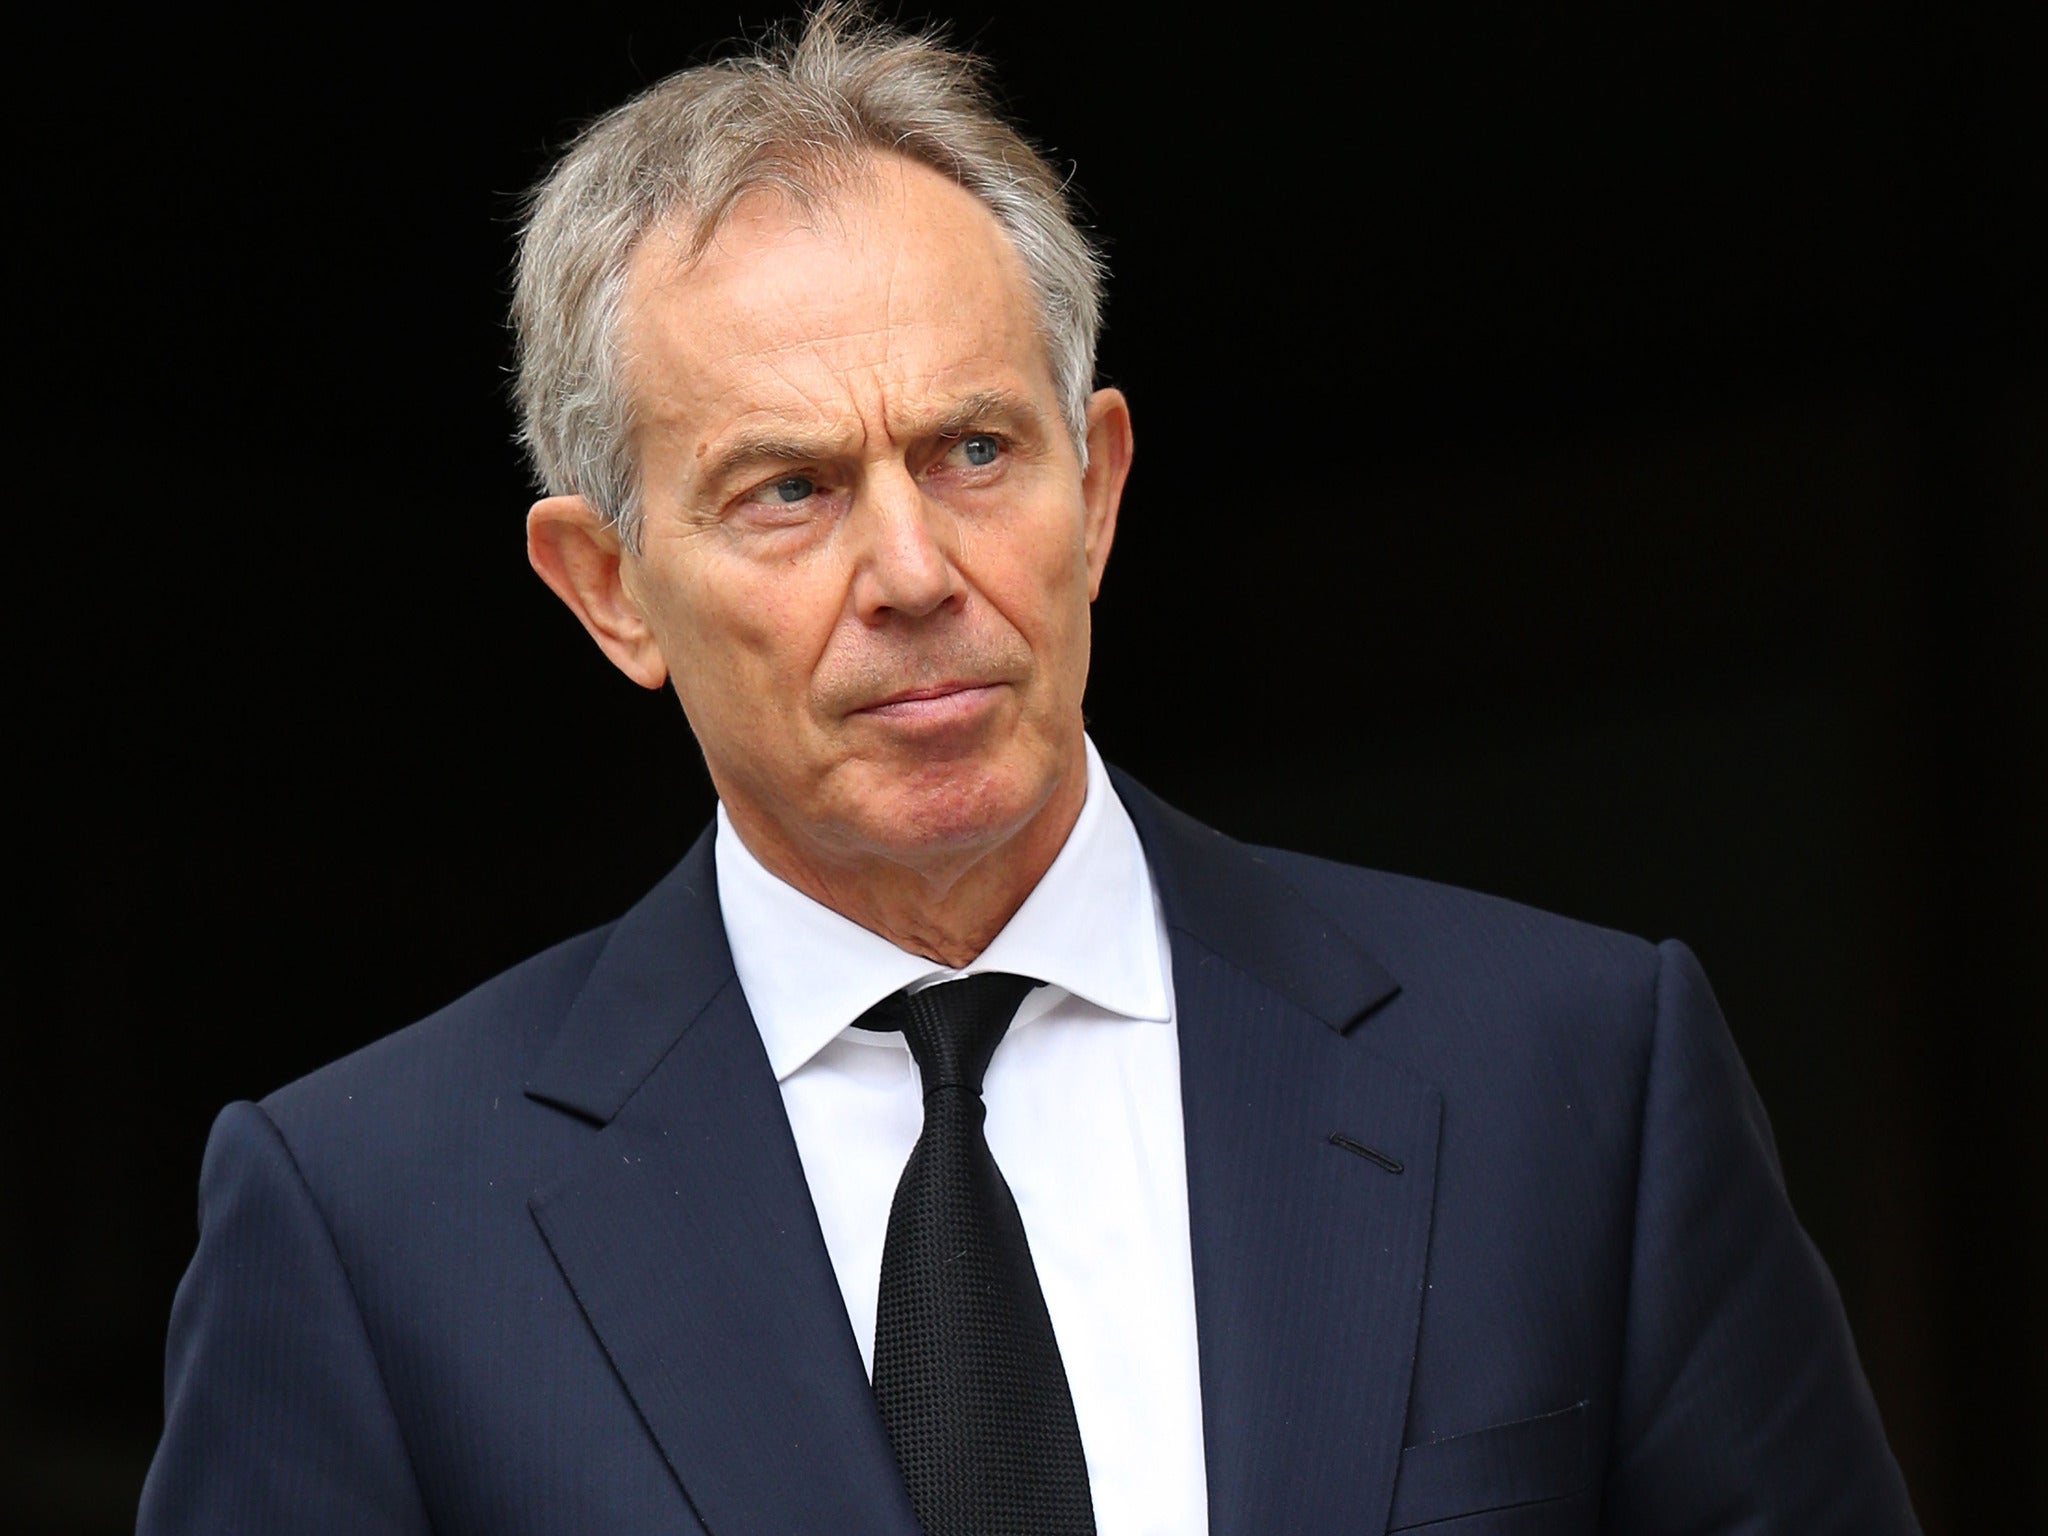 Tony Blair has said the ideologies of Islamic extremism needed to be consigned to the "junkyard of mistaken ideology"